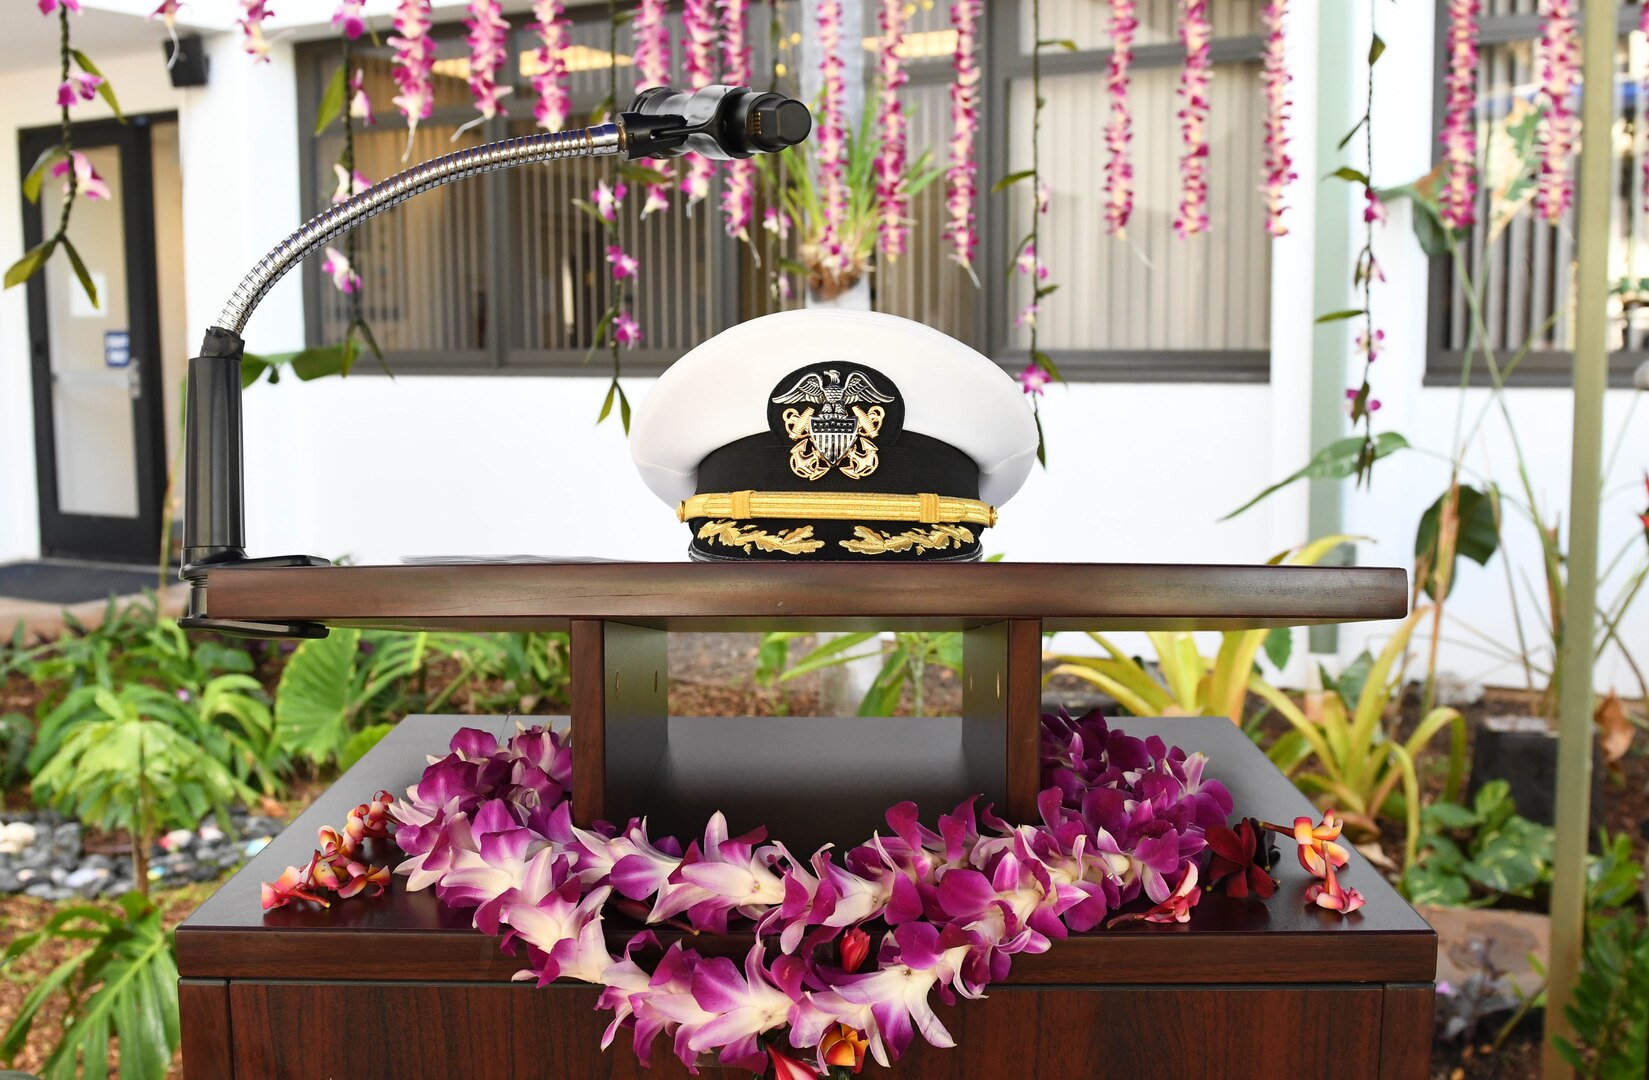 Podium is decorated with Hawaiian leis and uniform cover prior to ceremony.